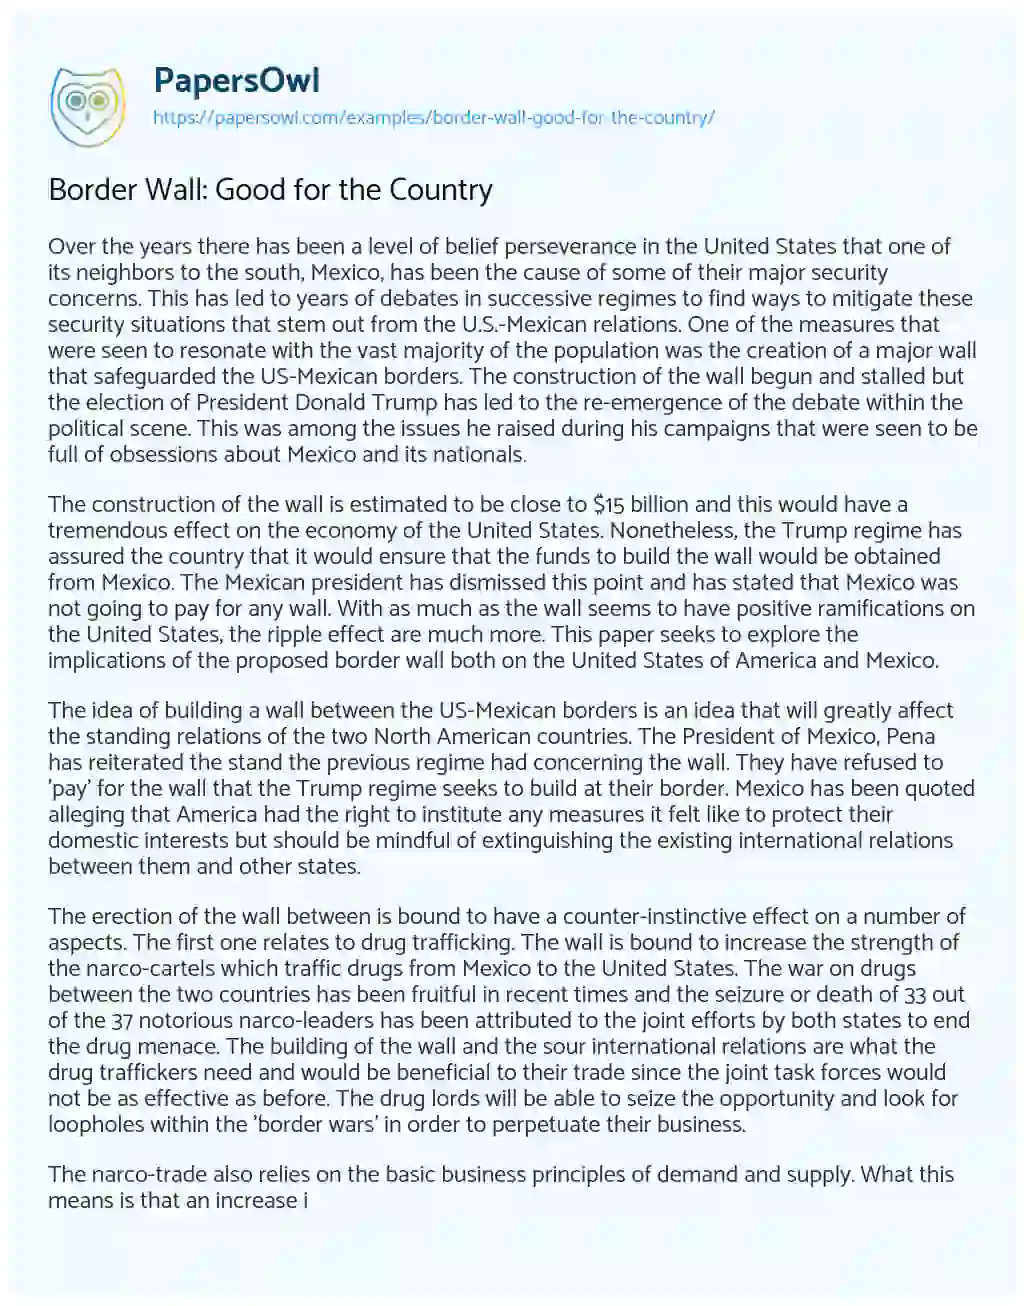 Essay on Border Wall: Good for the Country